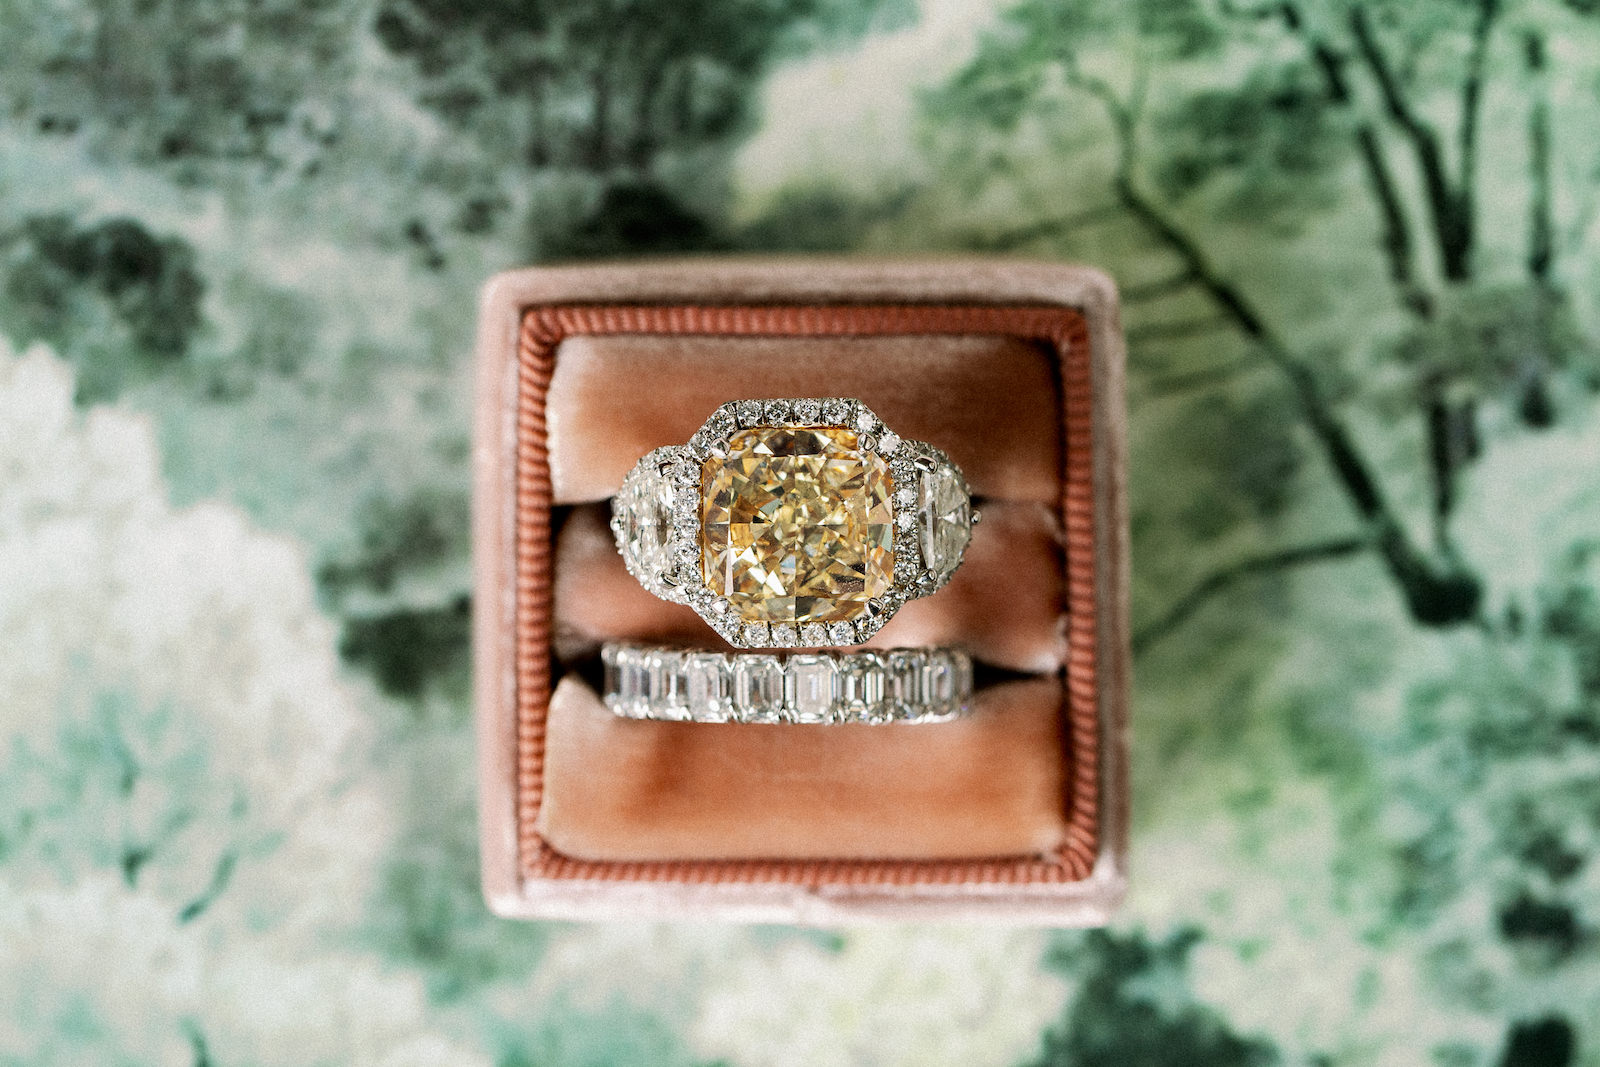 Yellow Cushion Cut Halo and Two Side Stones, Bride Diamond Wedding Ring in Mauve Ring Box | Tampa Bay Wedding Photographer Dewitt for Love